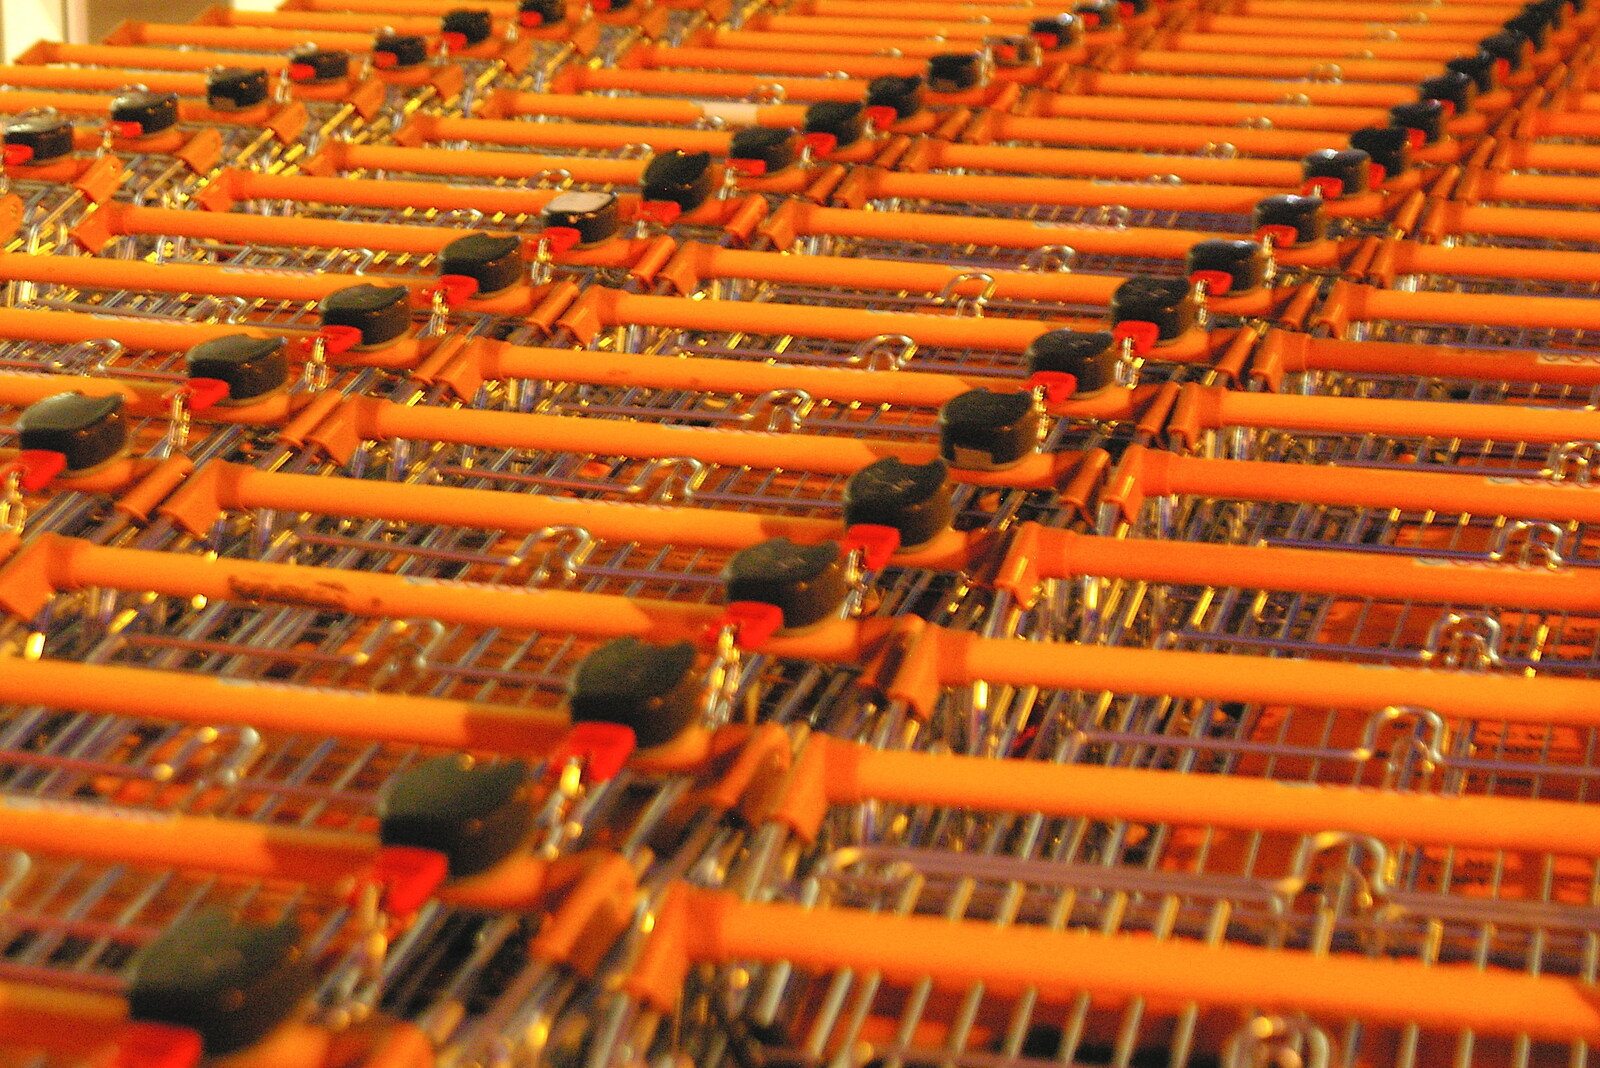 A million B&Q shopping trolleys from Pre-Christmas Roundup: Wigs, Beers and Kebabs, Diss, Norfolk - 24th December 2005